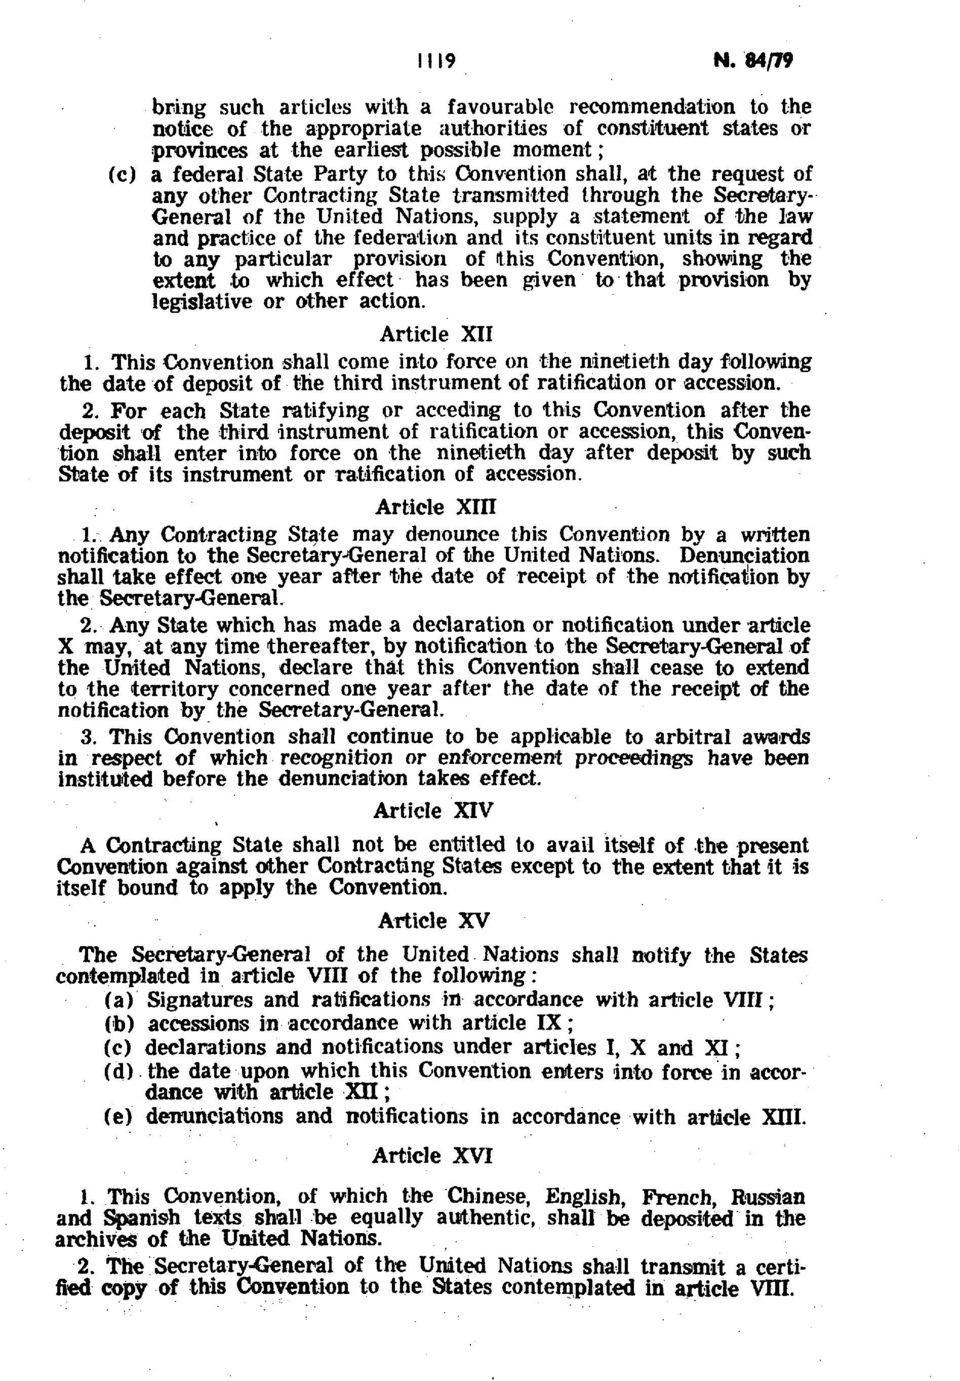 to this Convention shall, at the request of any other Contracting State transmitted through the Secretary General of the United Nations, supply a statement of the law and practice of the federation